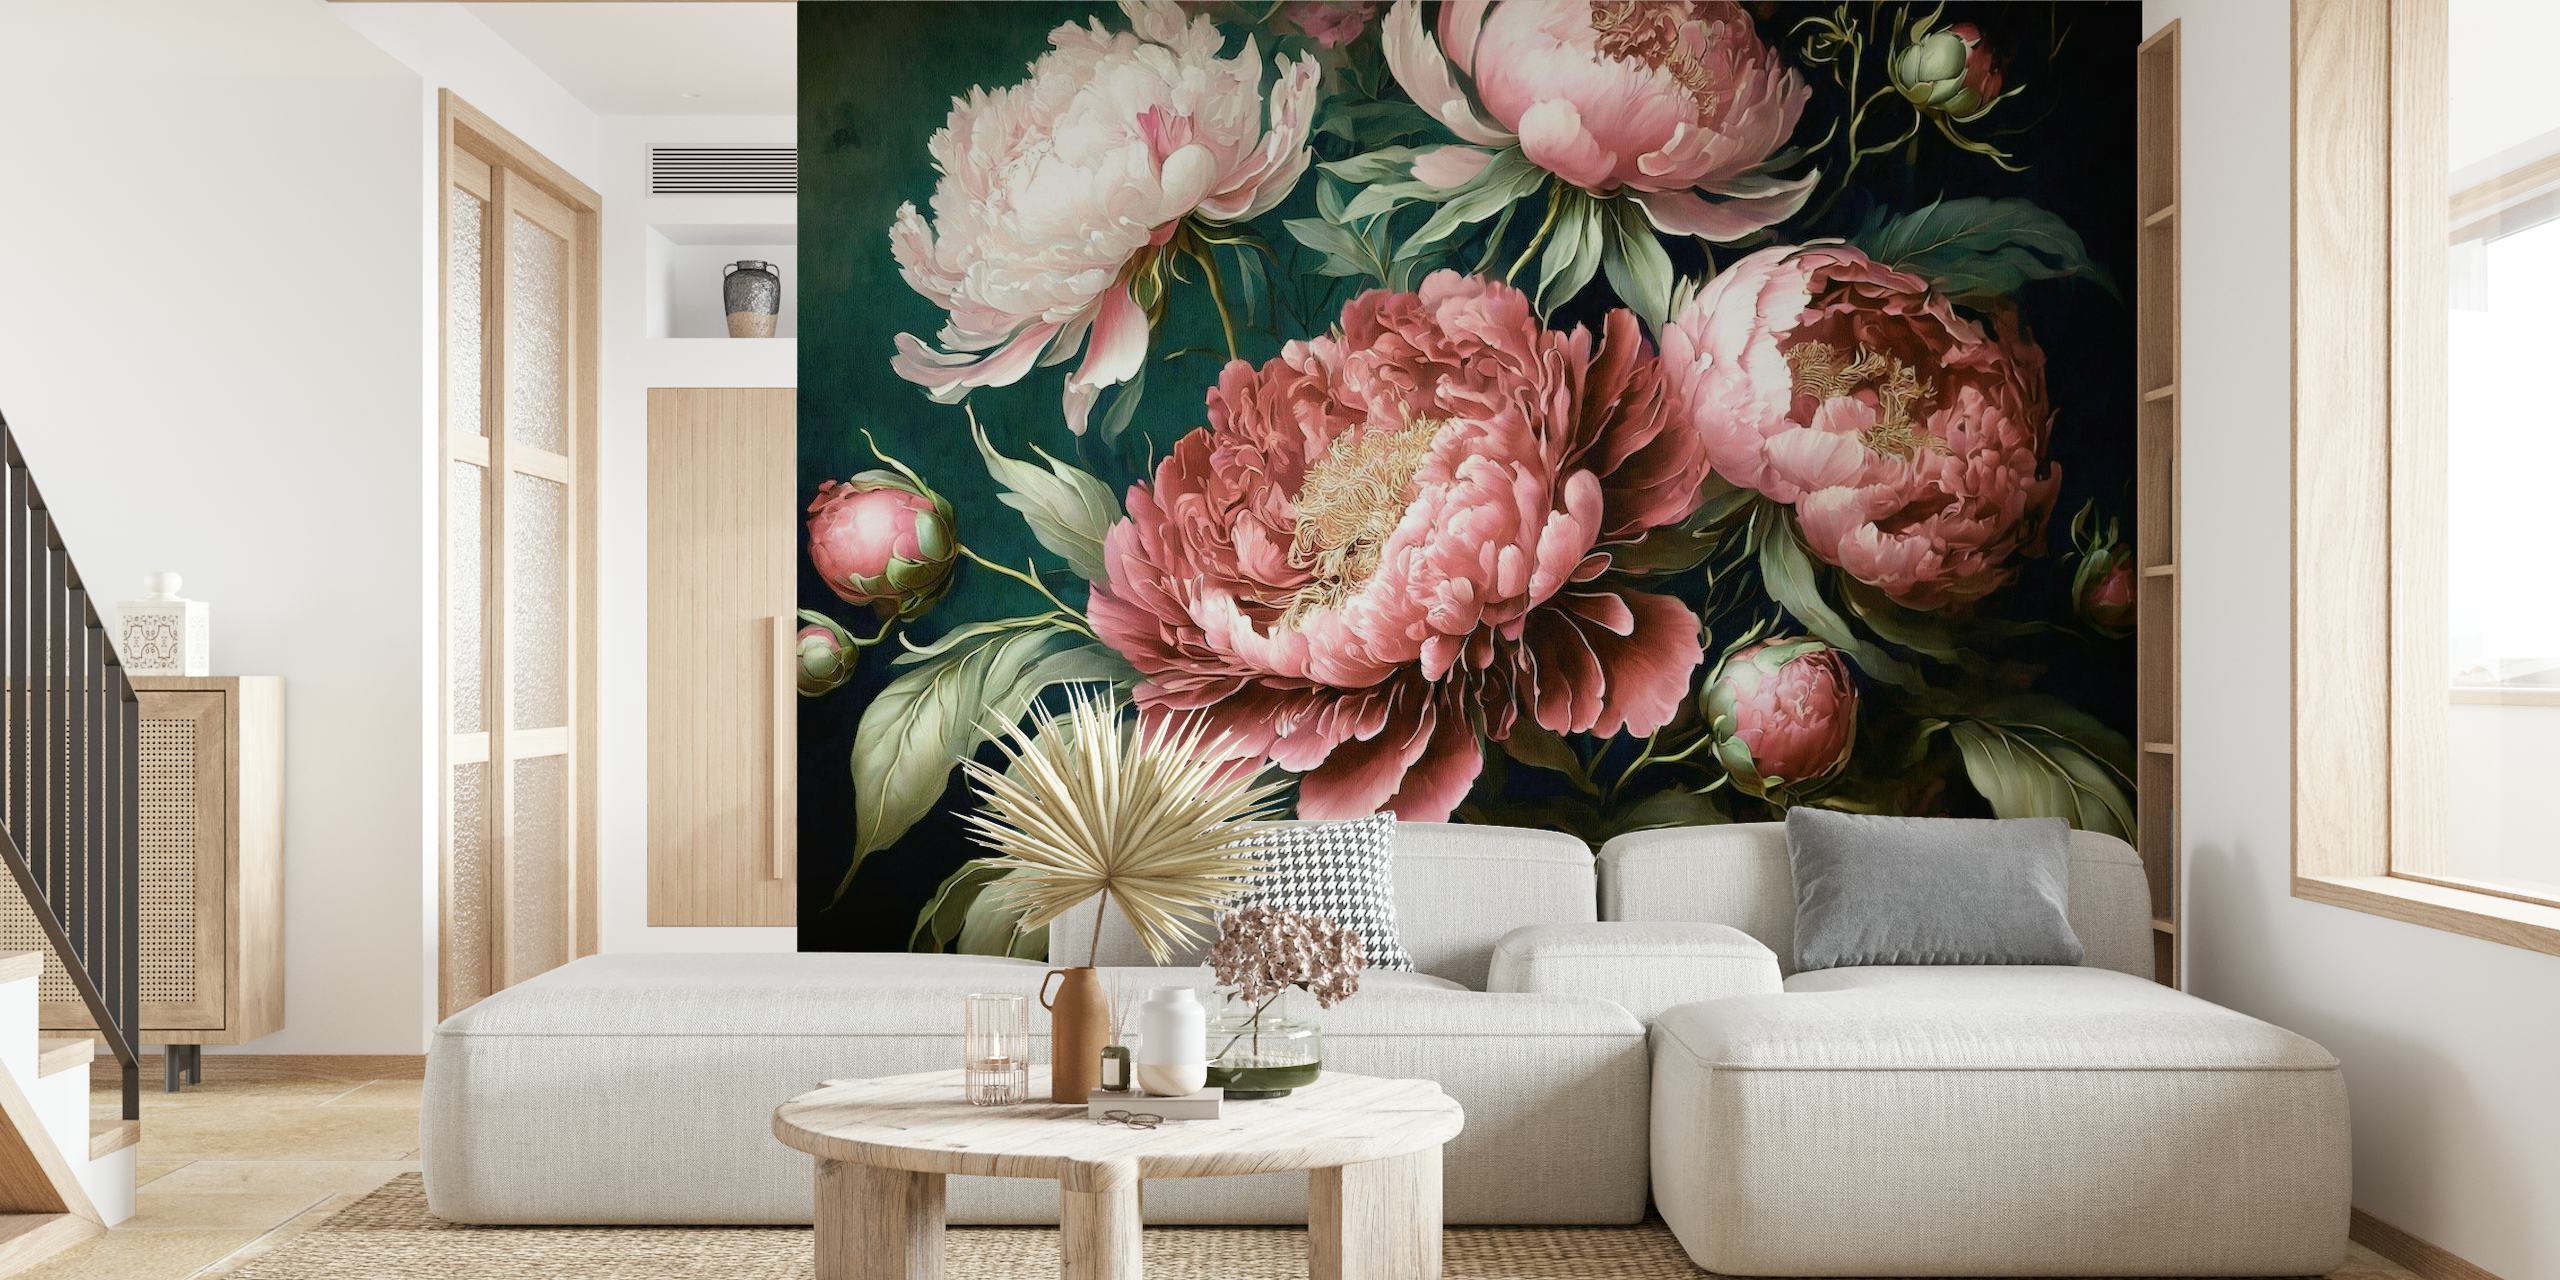 Baroque-style peonies wall mural with pink flowers on a dark background